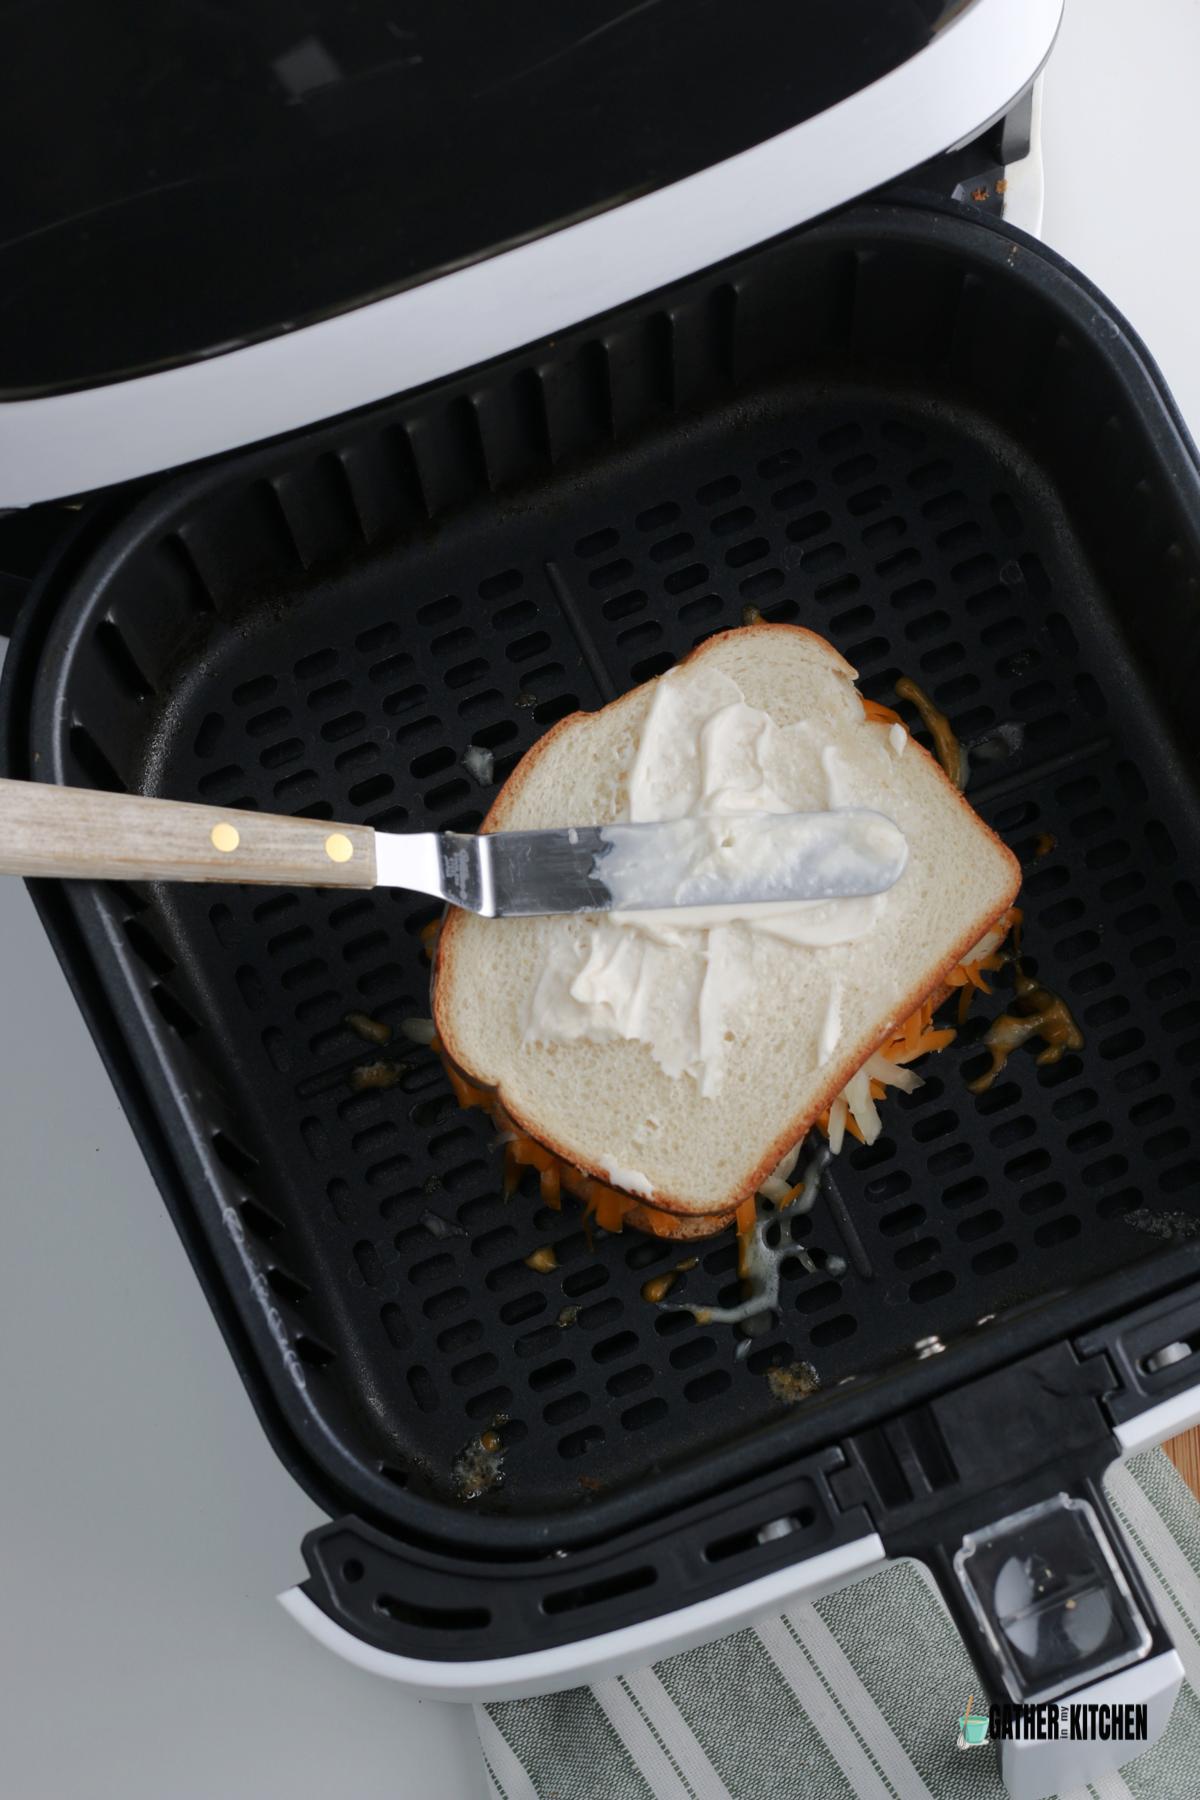 Uncooked sandwich in air fryer basket and spreading mayo over the top slice of bread.